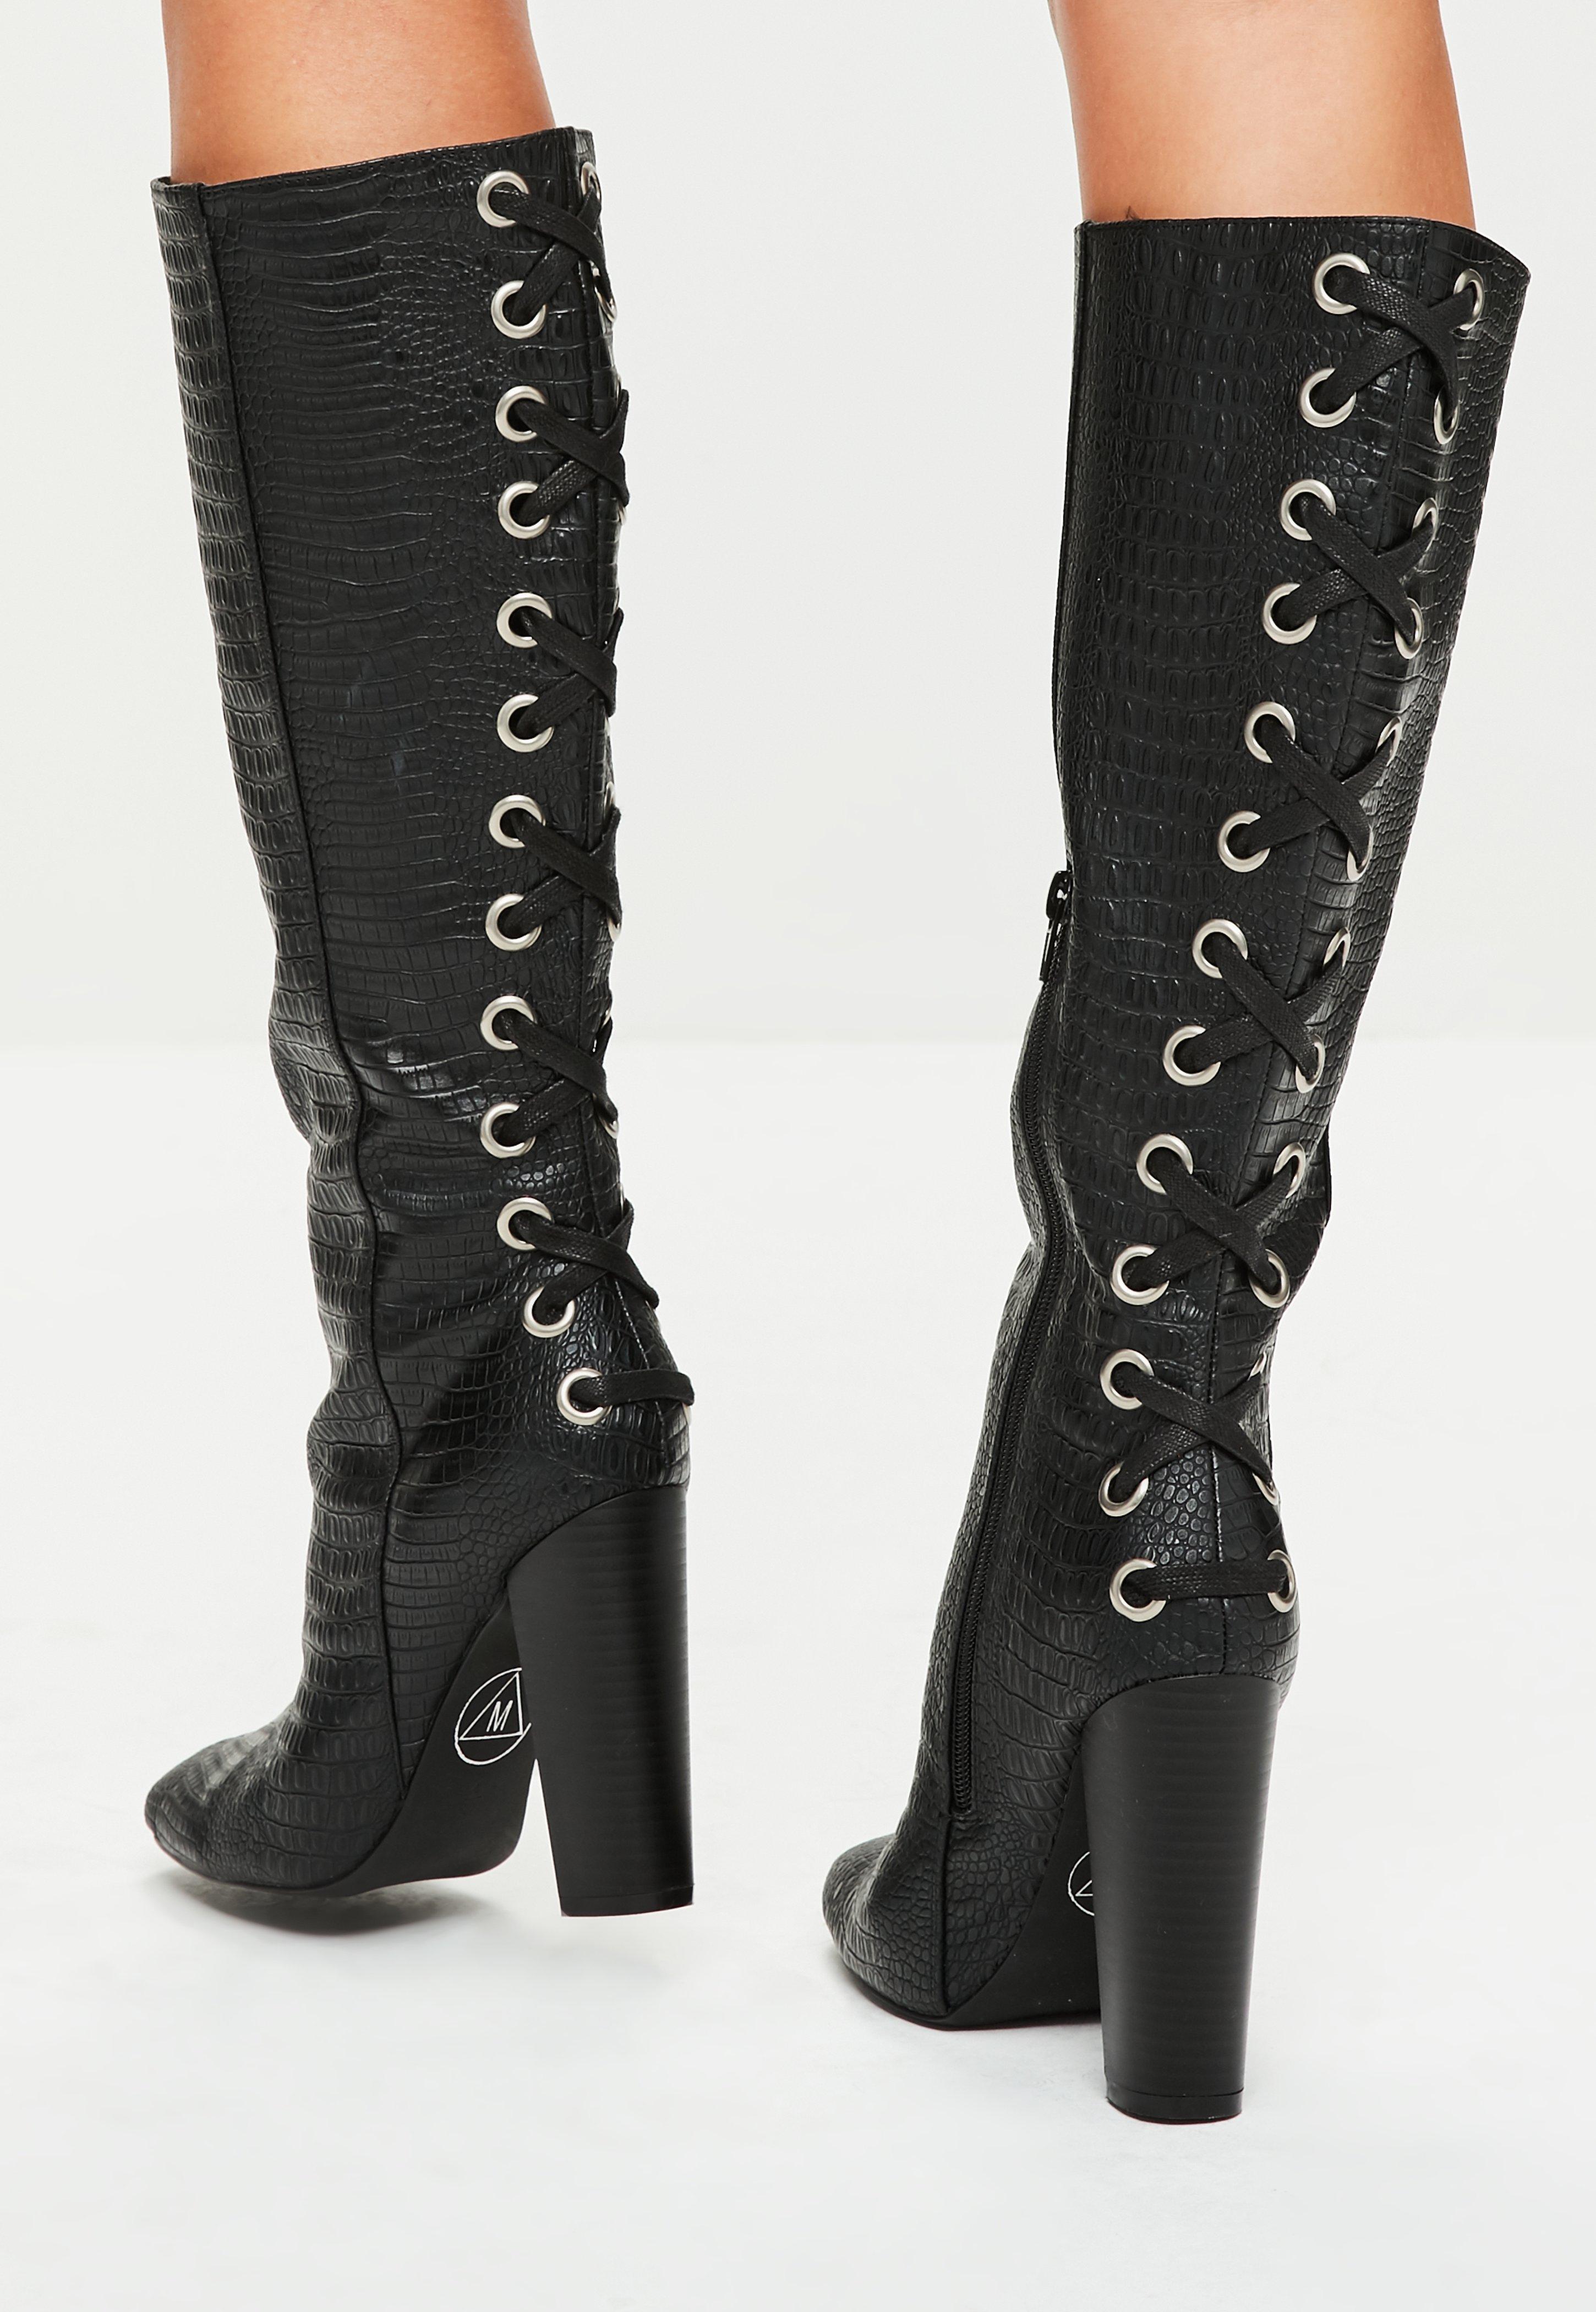 Lyst - Missguided Black Snake Print Lace Up Knee High Boots in Black